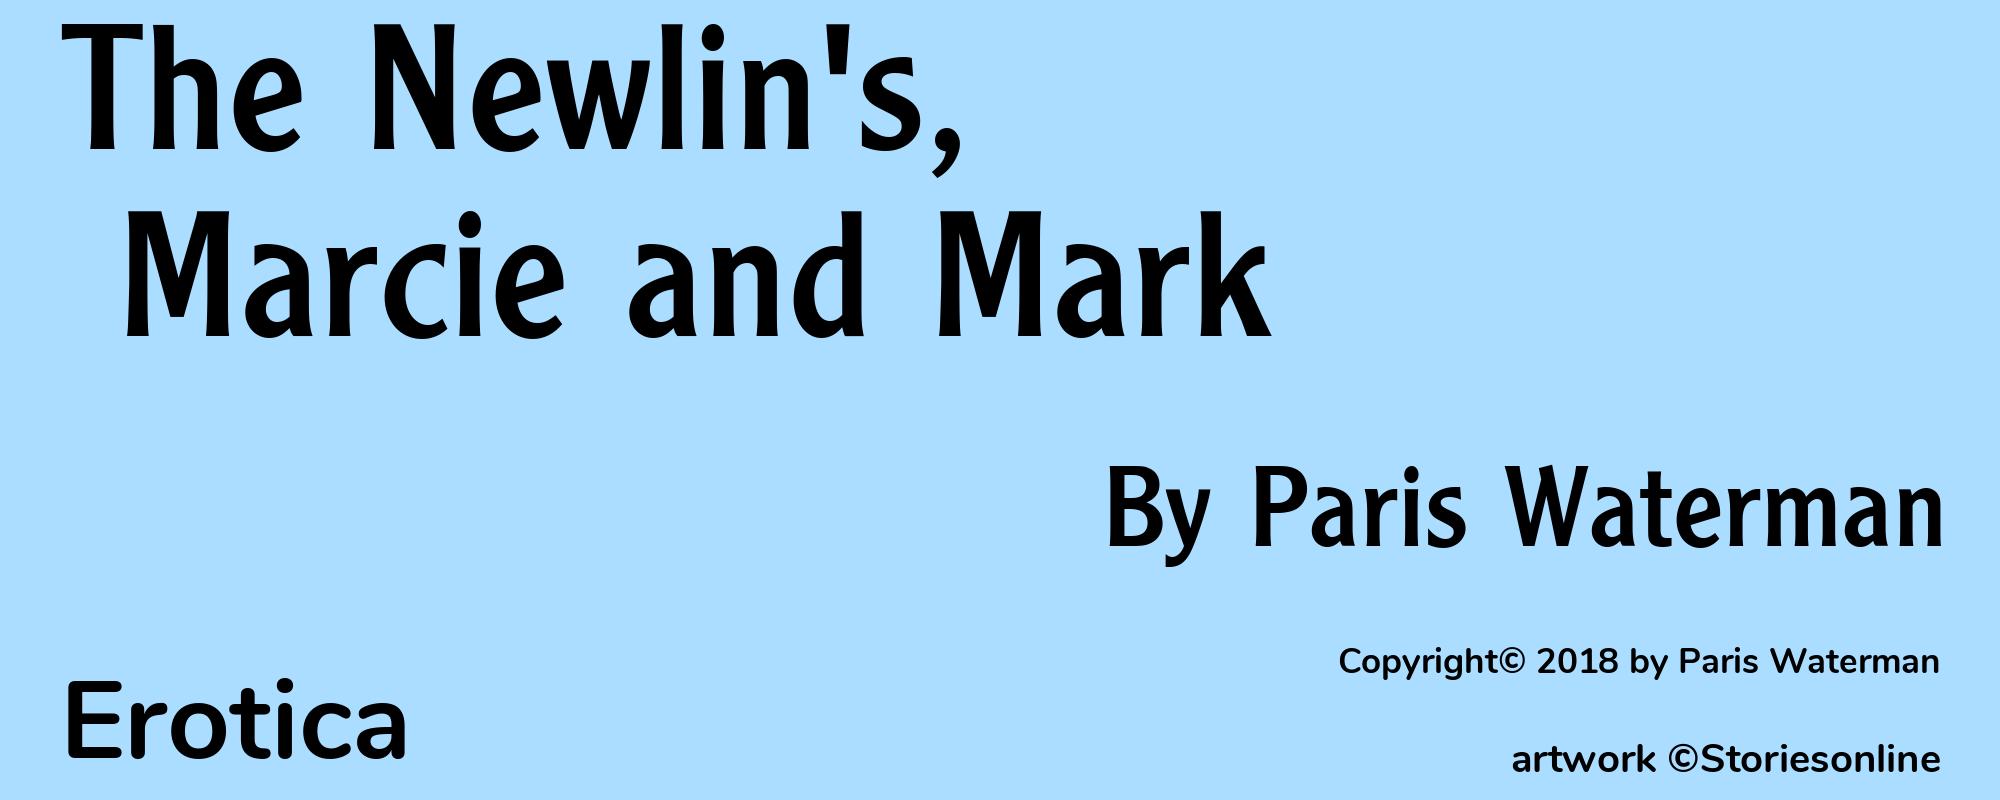 The Newlin's, Marcie and Mark - Cover